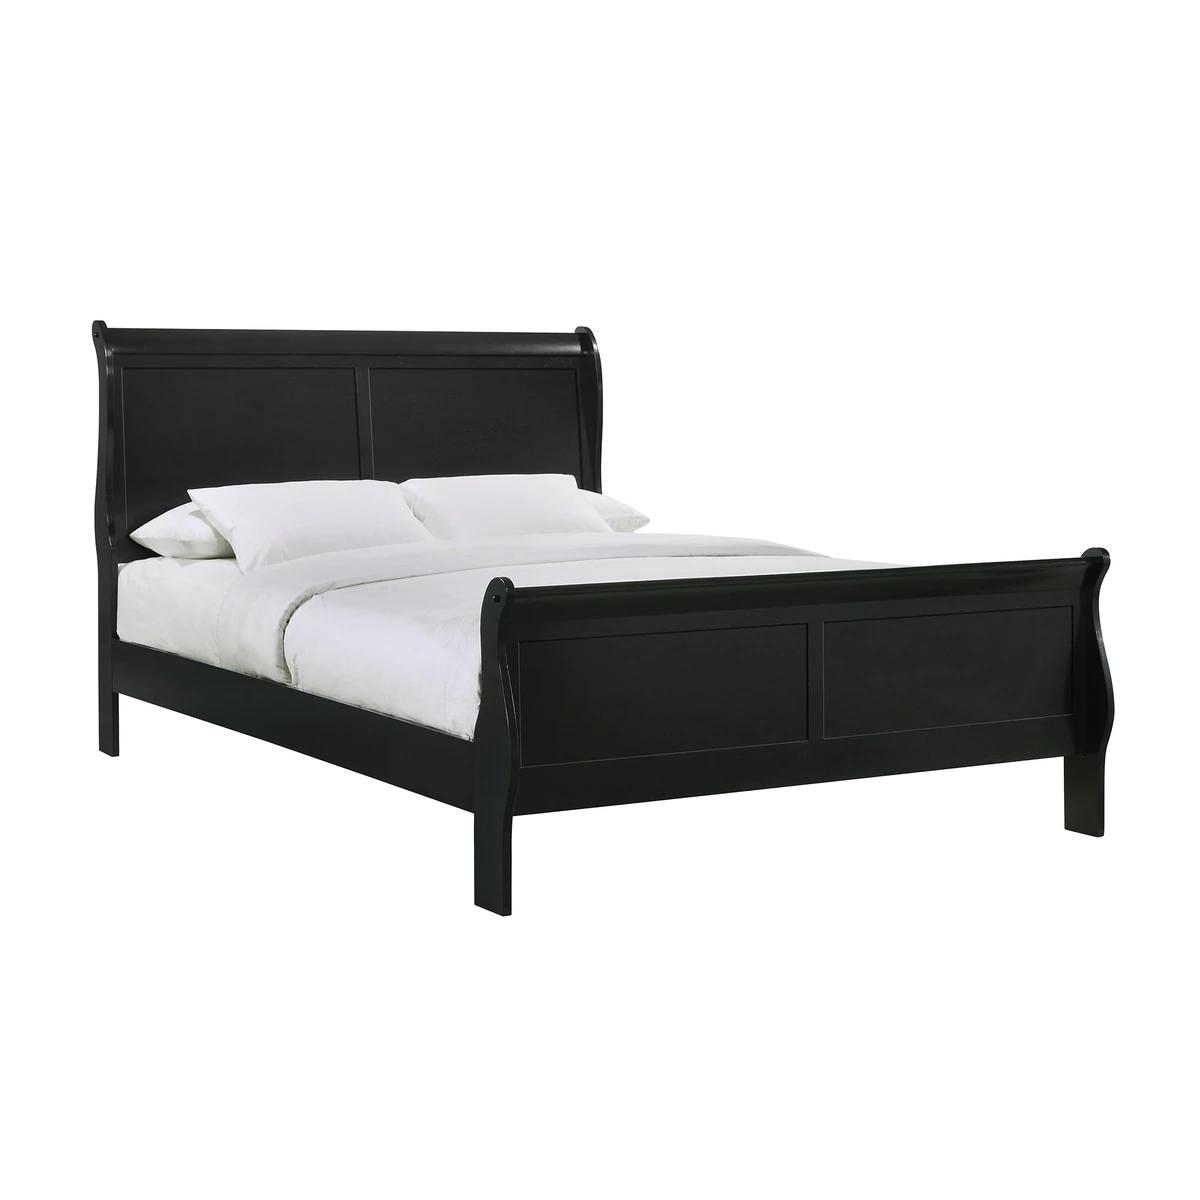 Contemporary, Simple Panel Bed Louis Philip B3950-Q-Bed in Black 